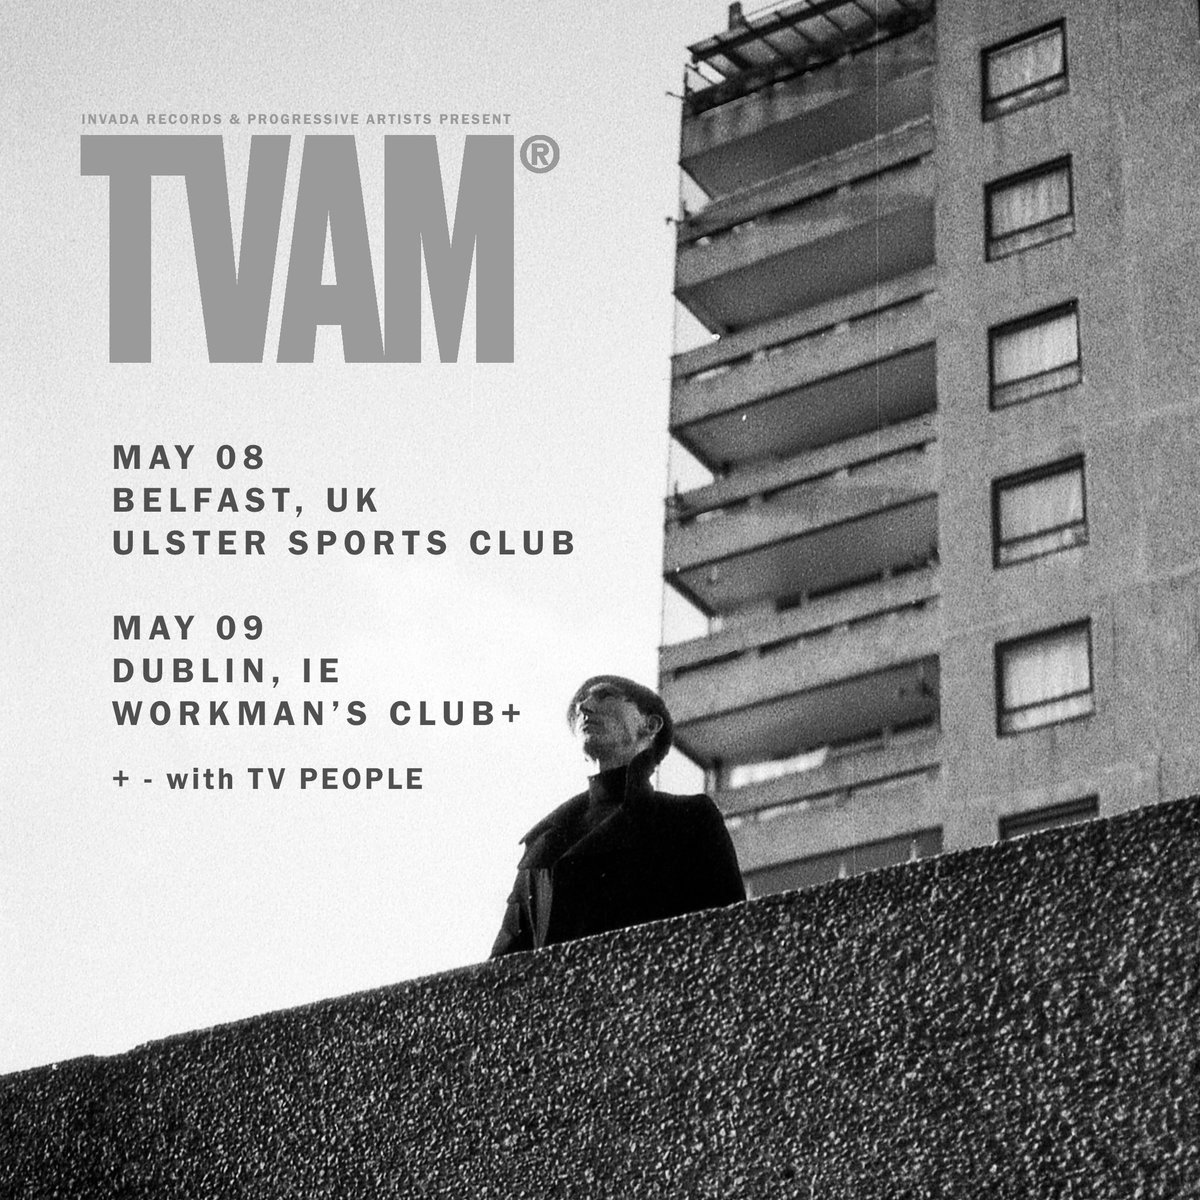 DUBLIN TONIGHT!! @WorkmansDublin with @tvpeople_band Tickets - tvamindustries.com/tour/ See you down the front x